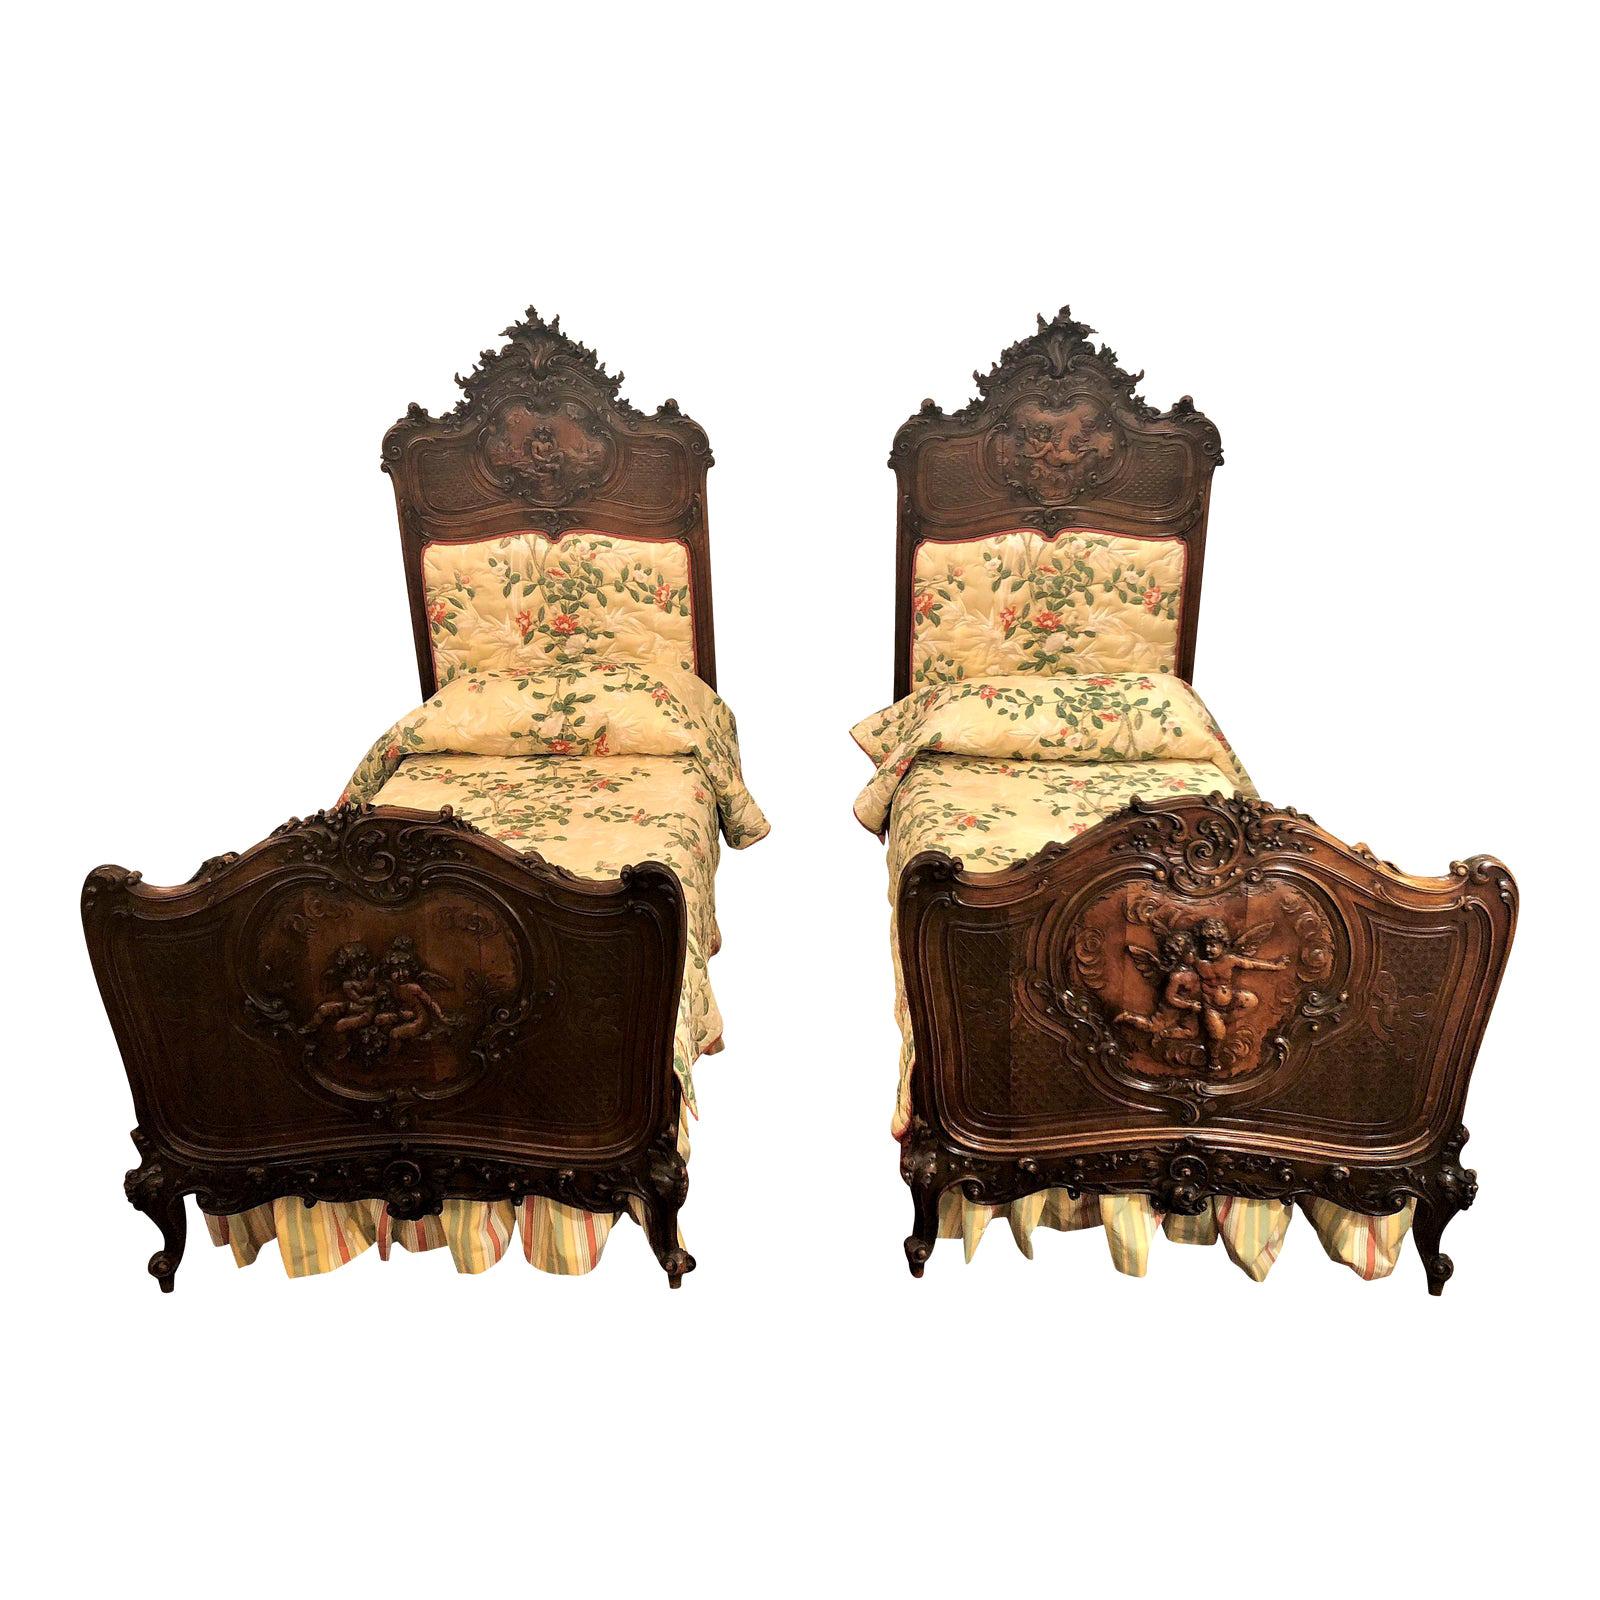 Pair of Antique 19th Century French Walnut Beds